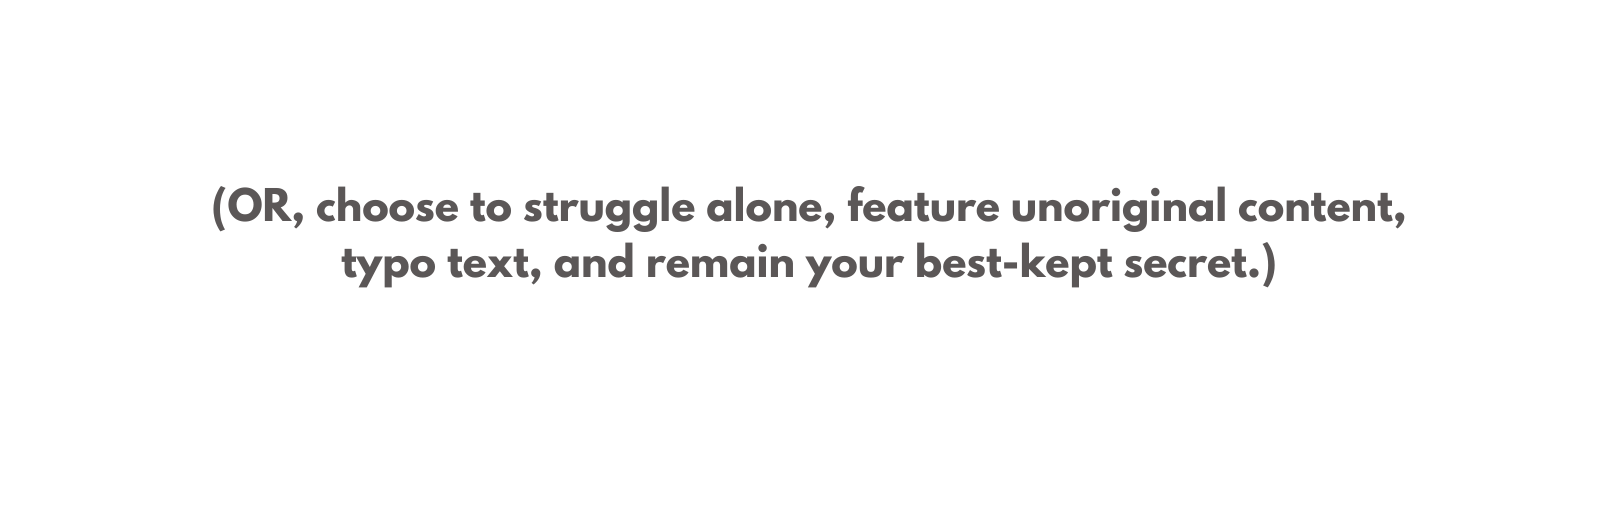 OR choose to struggle alone feature unoriginal content typo text and remain your best kept secret